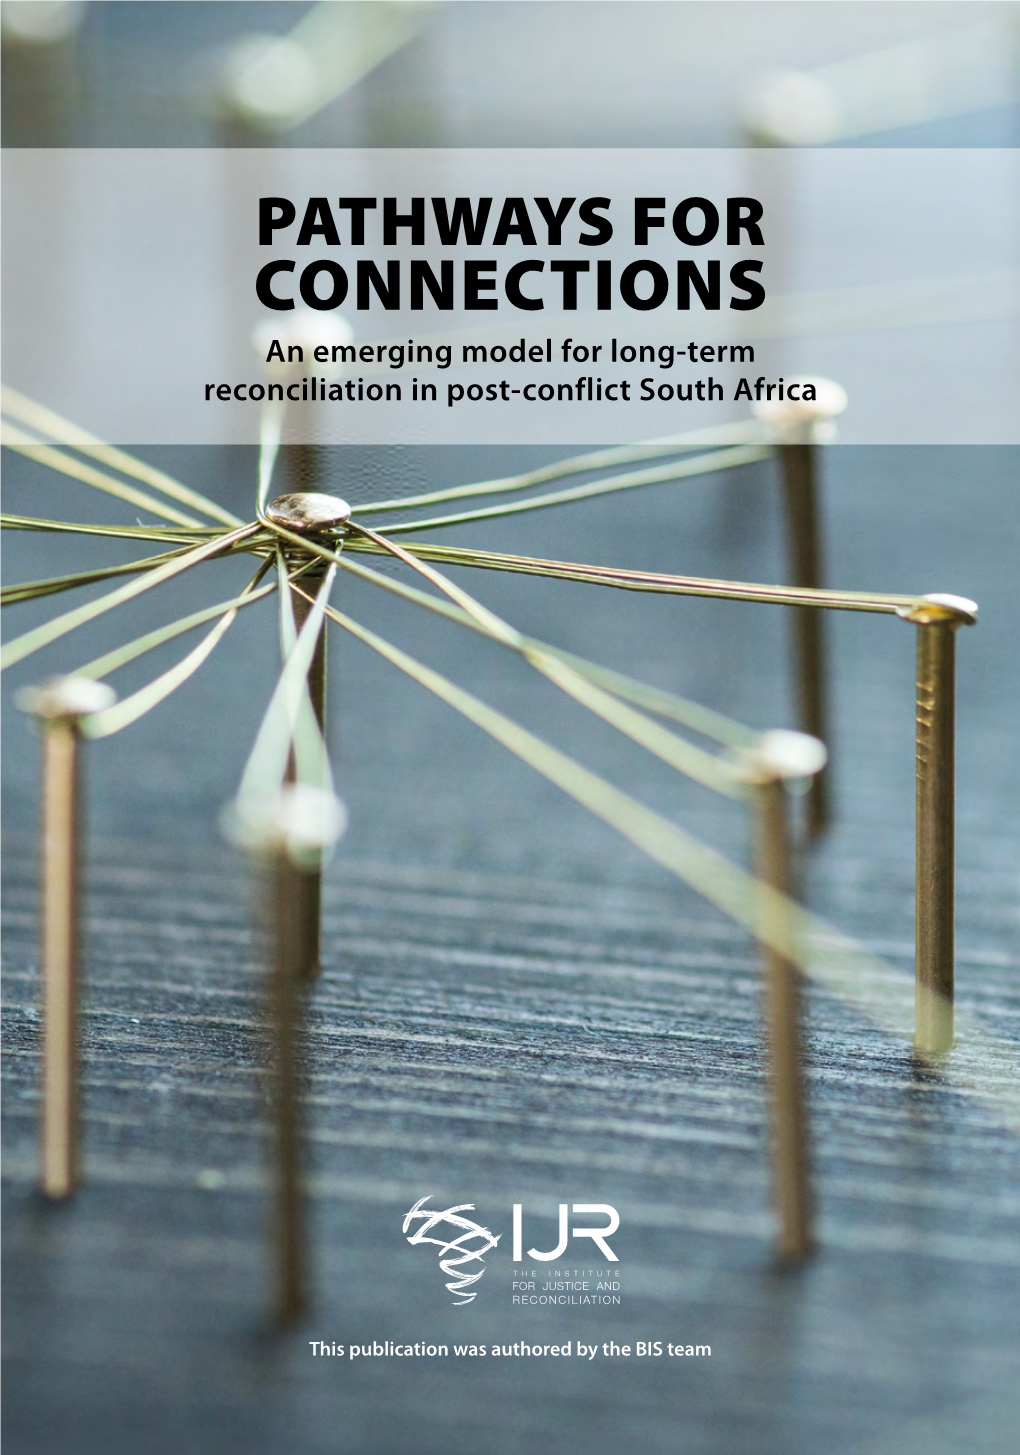 PATHWAYS for CONNECTIONS an Emerging Model for Long-Term Reconciliation in Post-Conflict South Africa